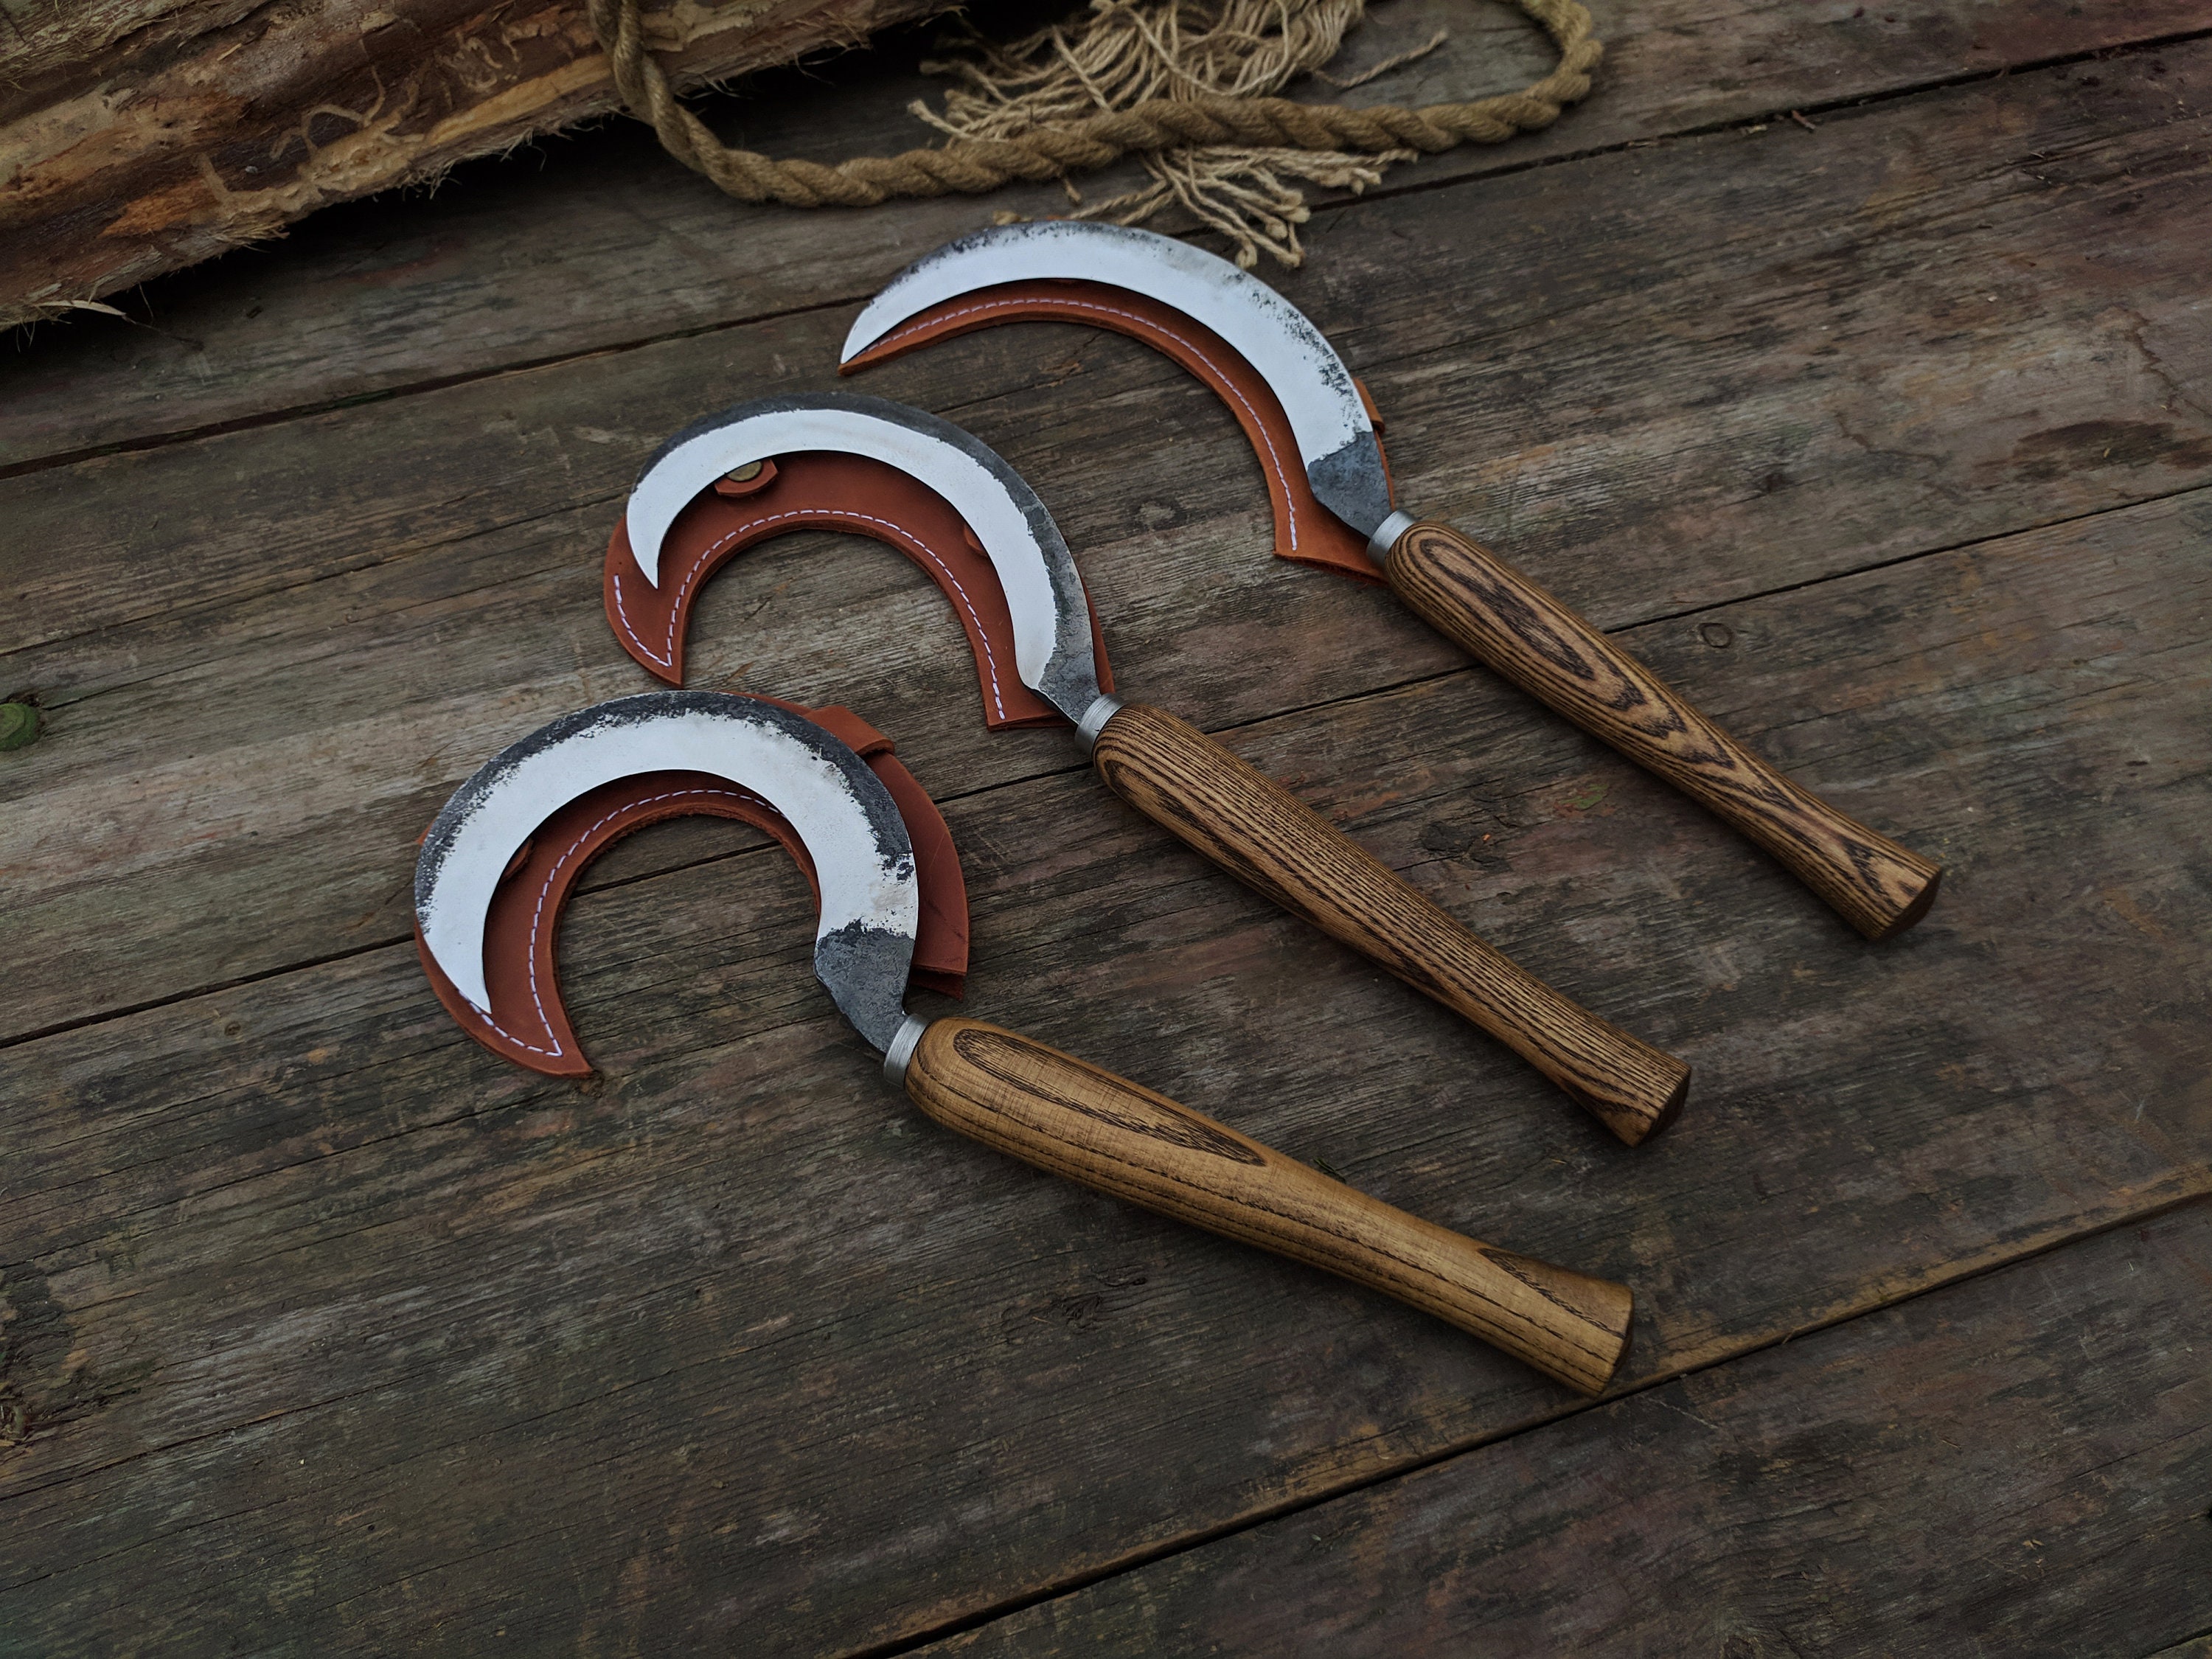 Handmade Forged Sickle Set 3pcs. the Tool for Herbalism. Forged